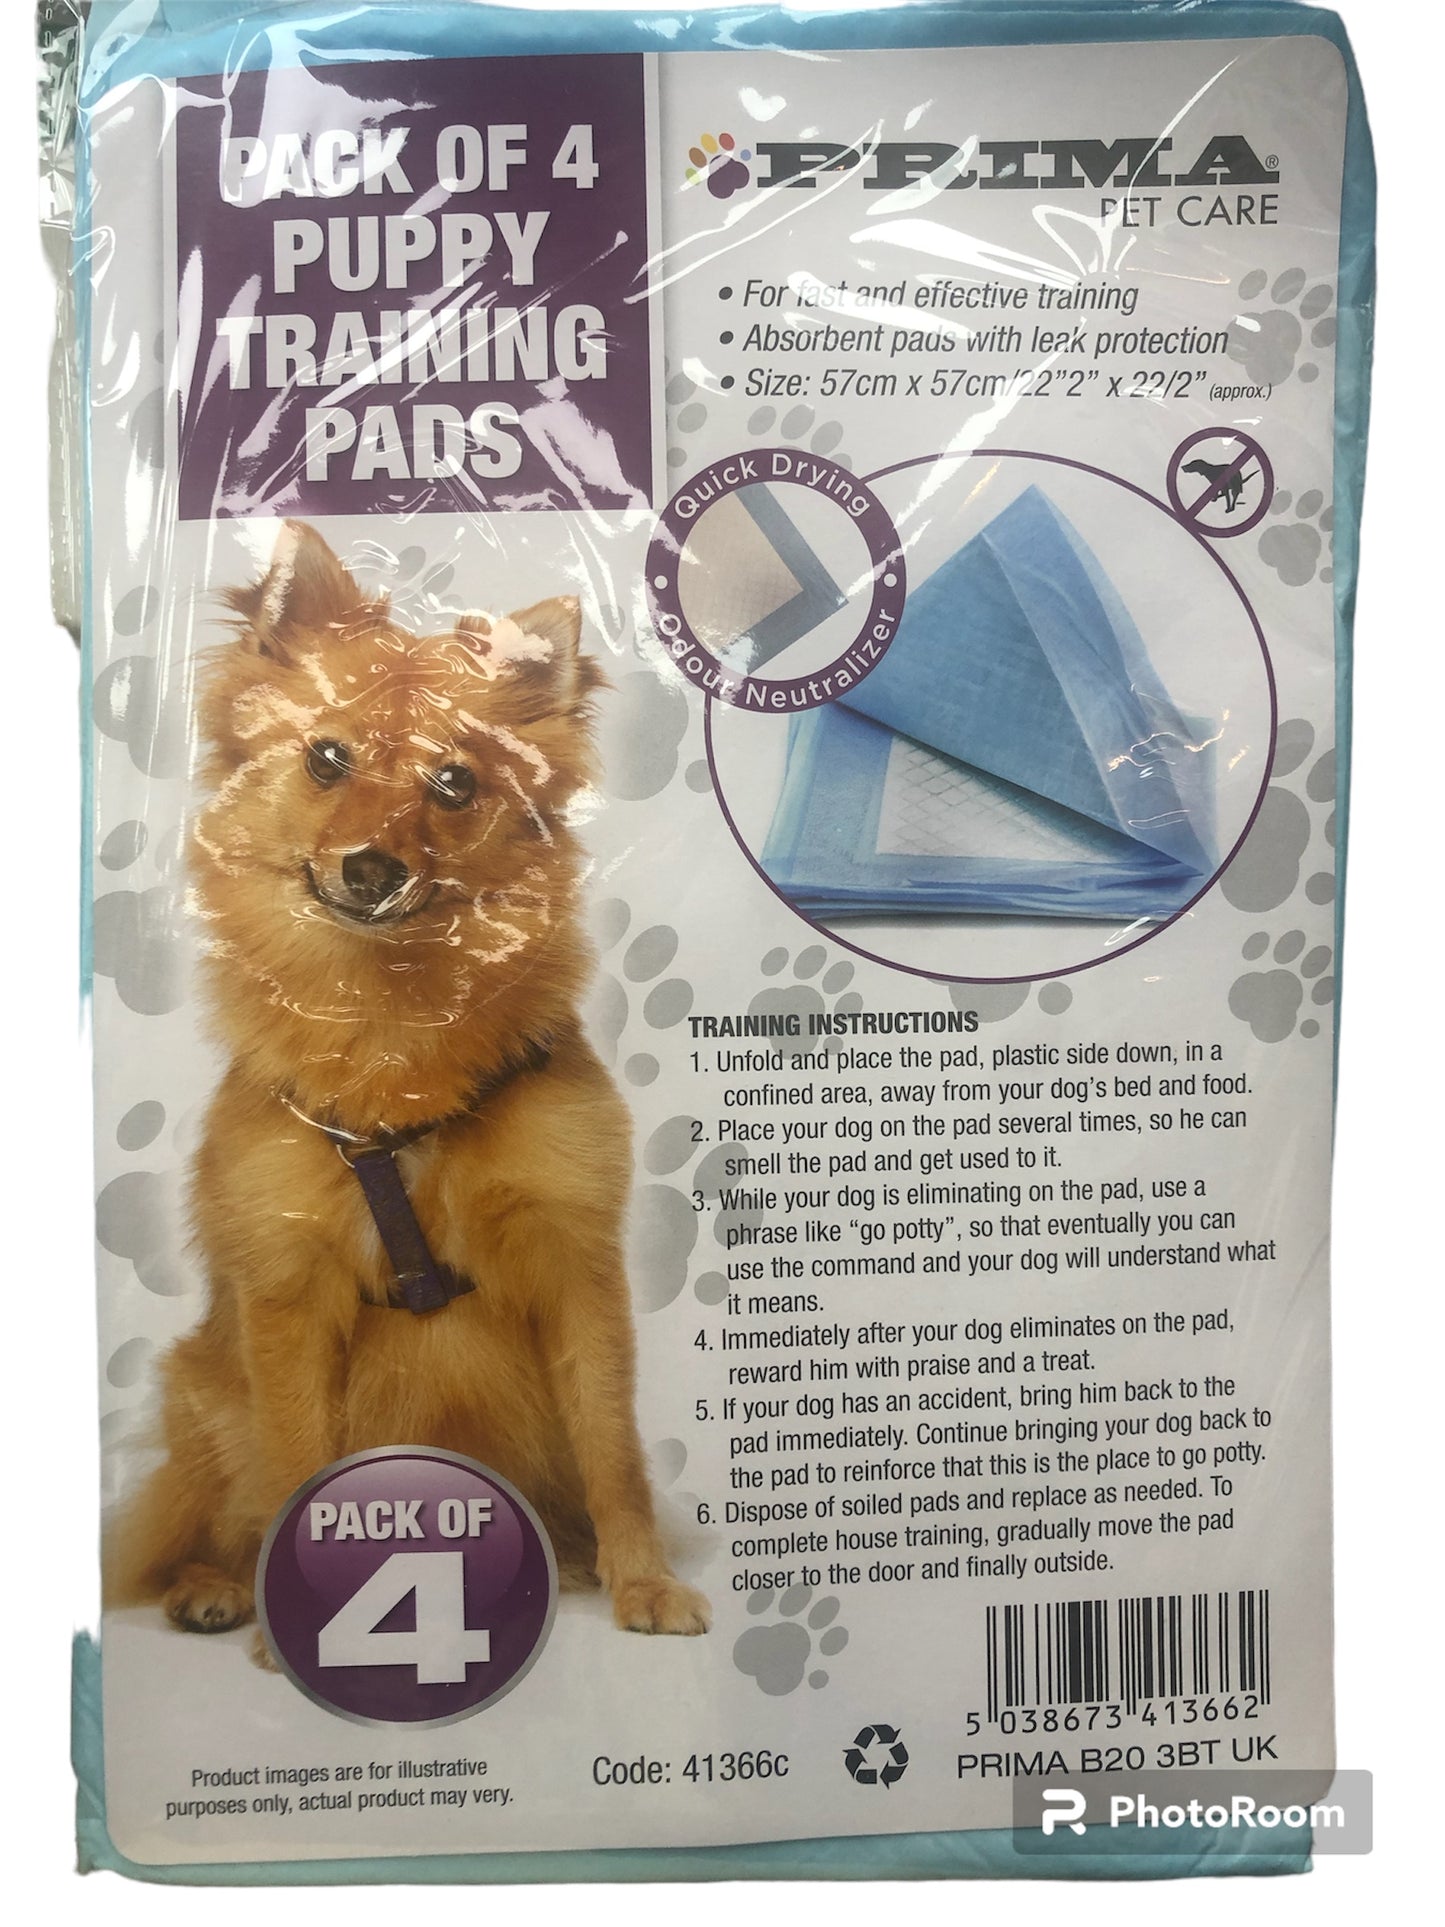 Pack of 4 puppy training pads